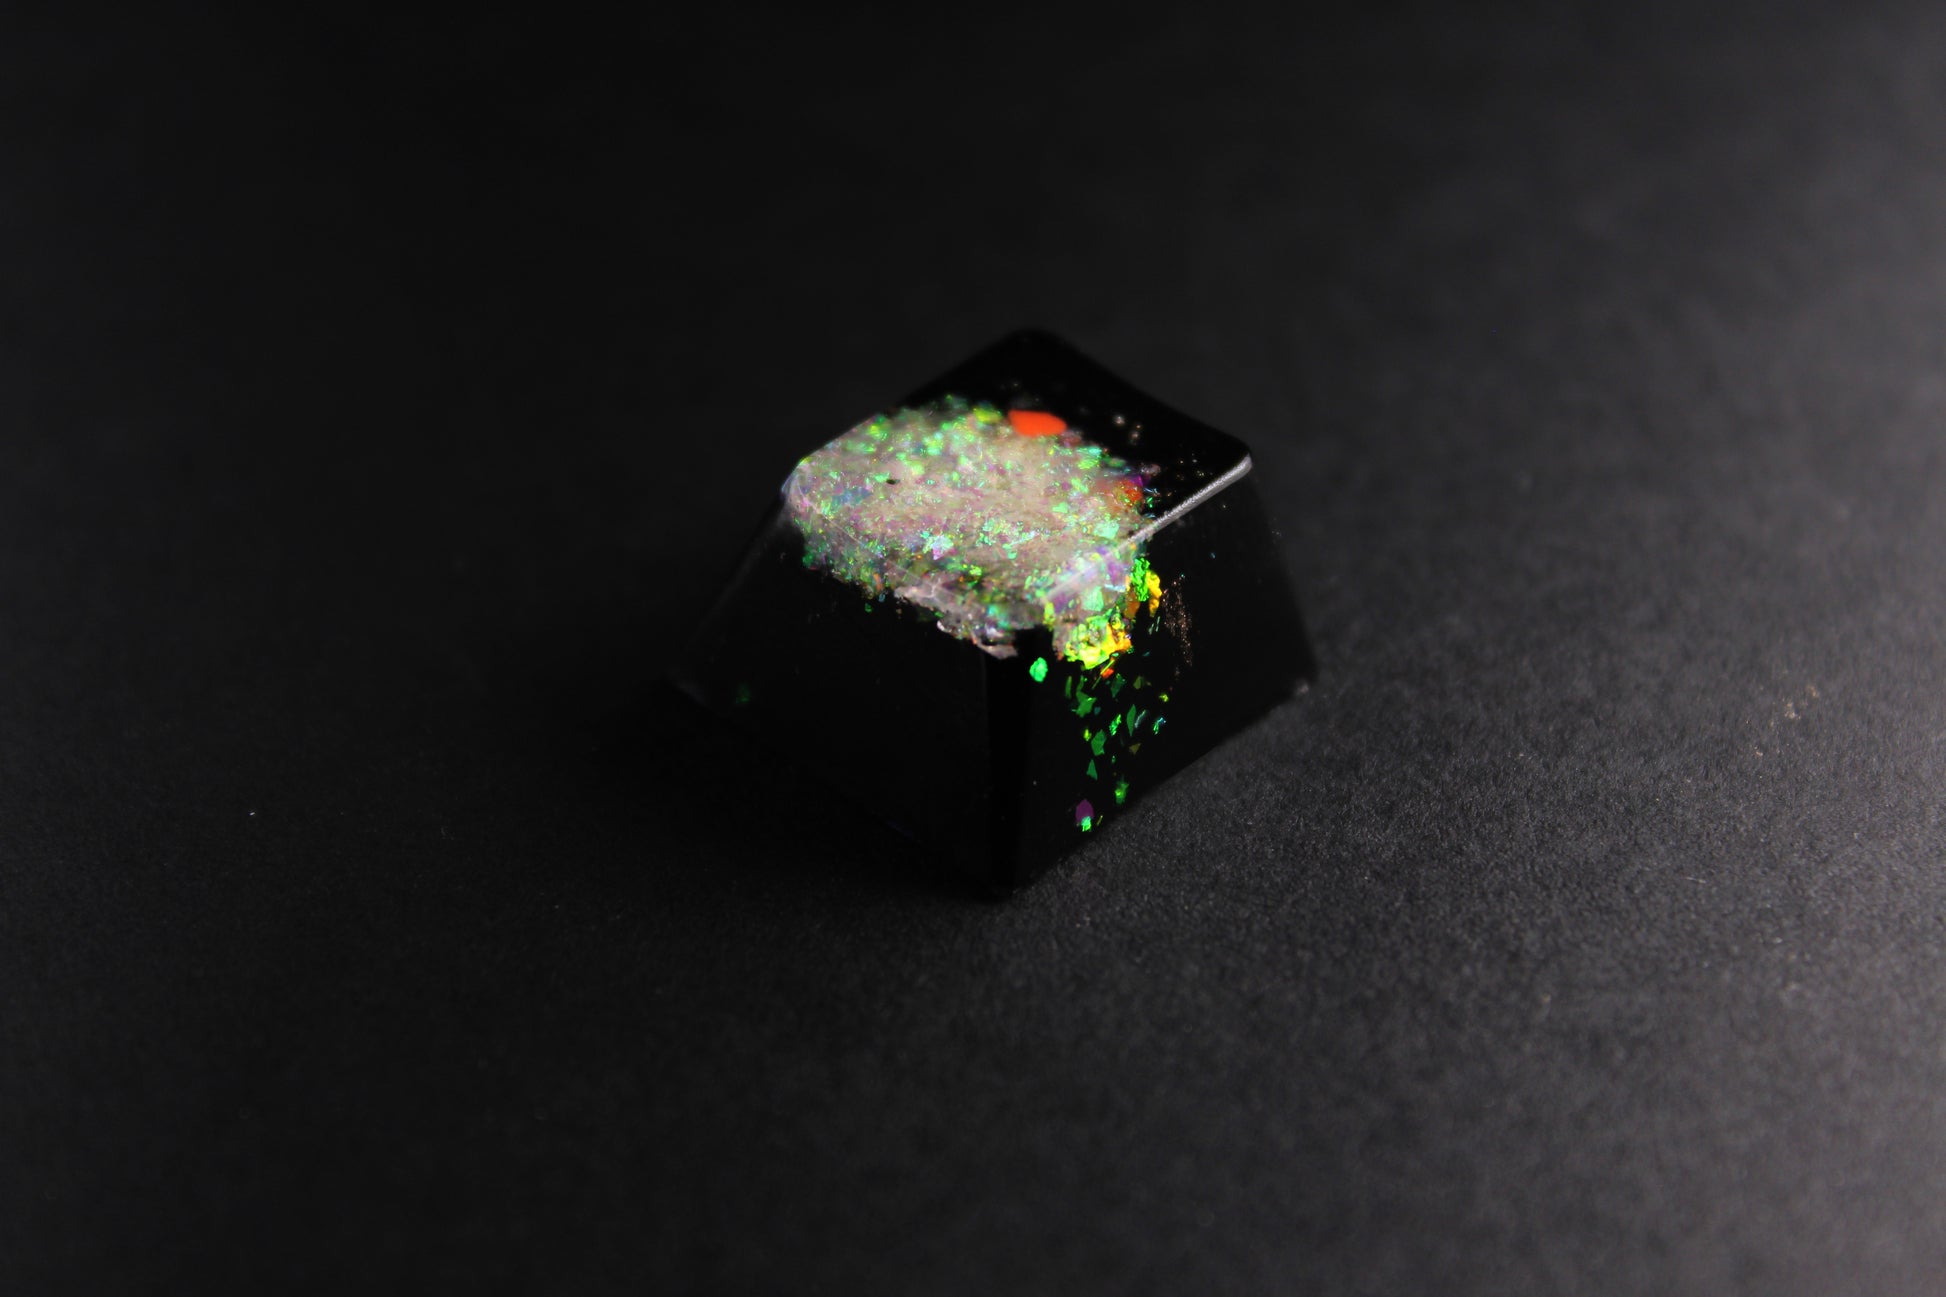 Cherry Esc - Earth Teaser - PrimeCaps Keycap - Blank and Sculpted Artisan Keycaps for cherry MX mechanical keyboards 